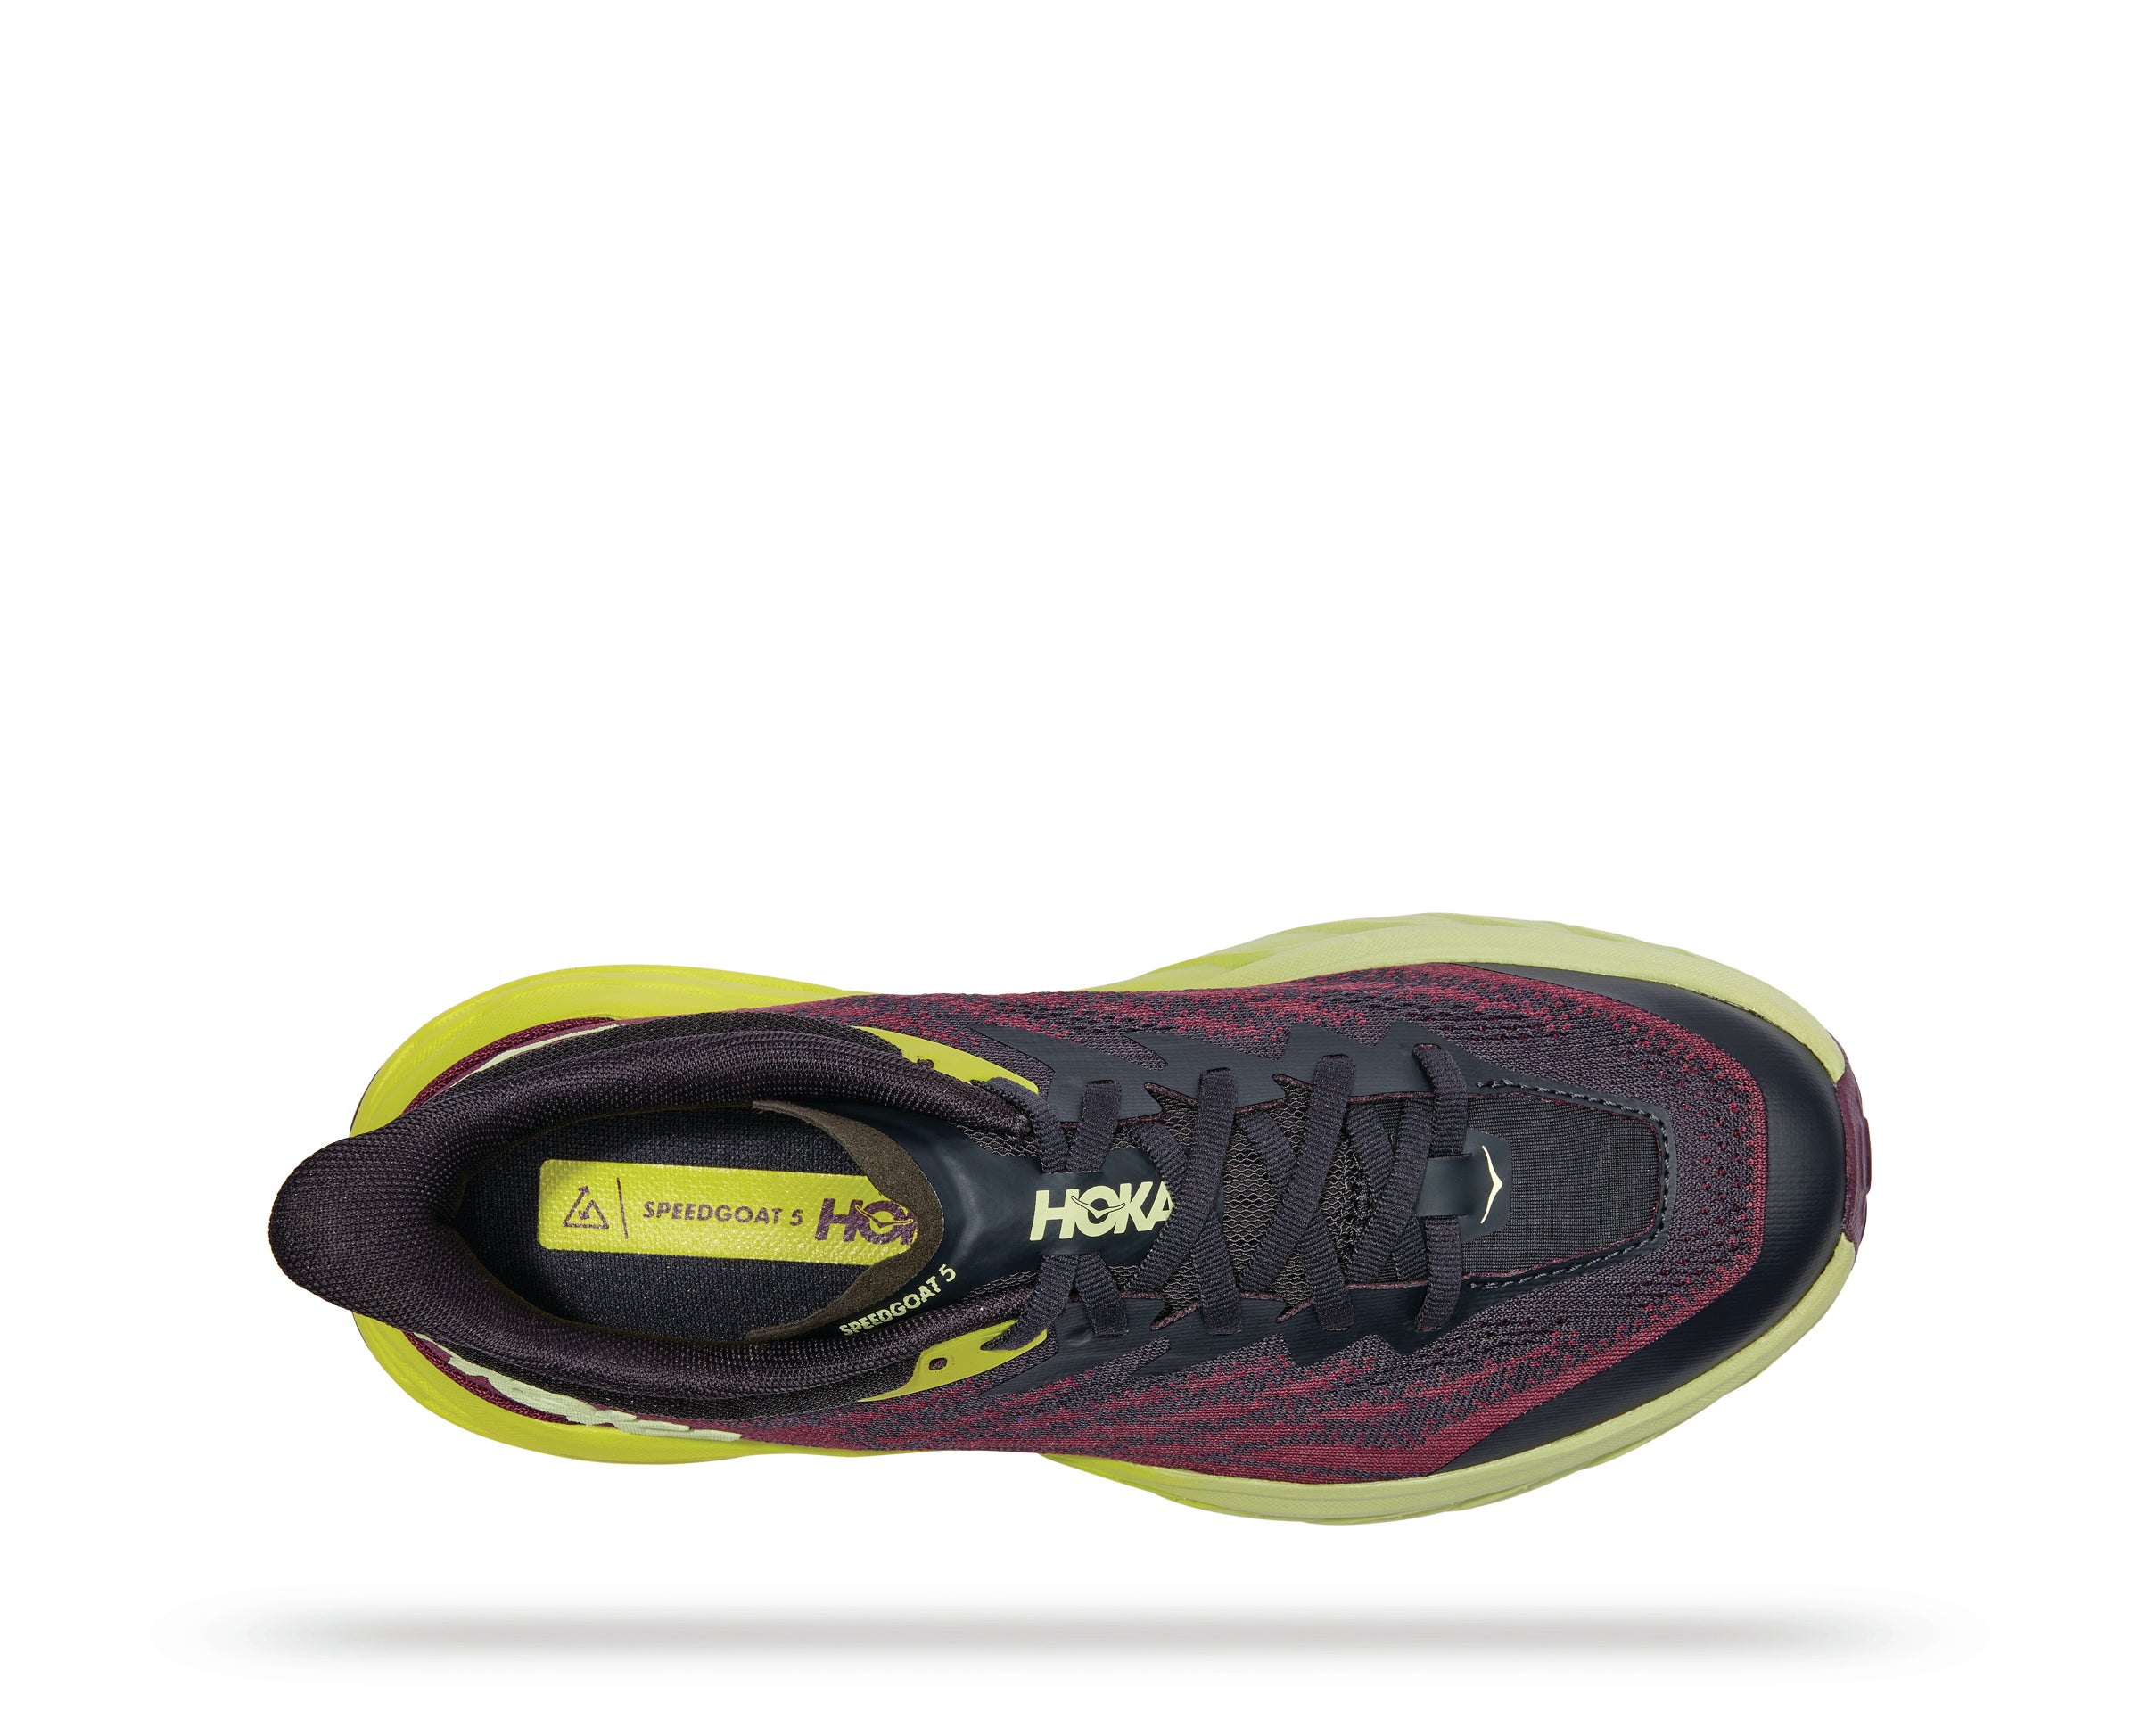 Top view of the Women's Speedgoat 5 in the color Blue Graphite/Evening Primrose